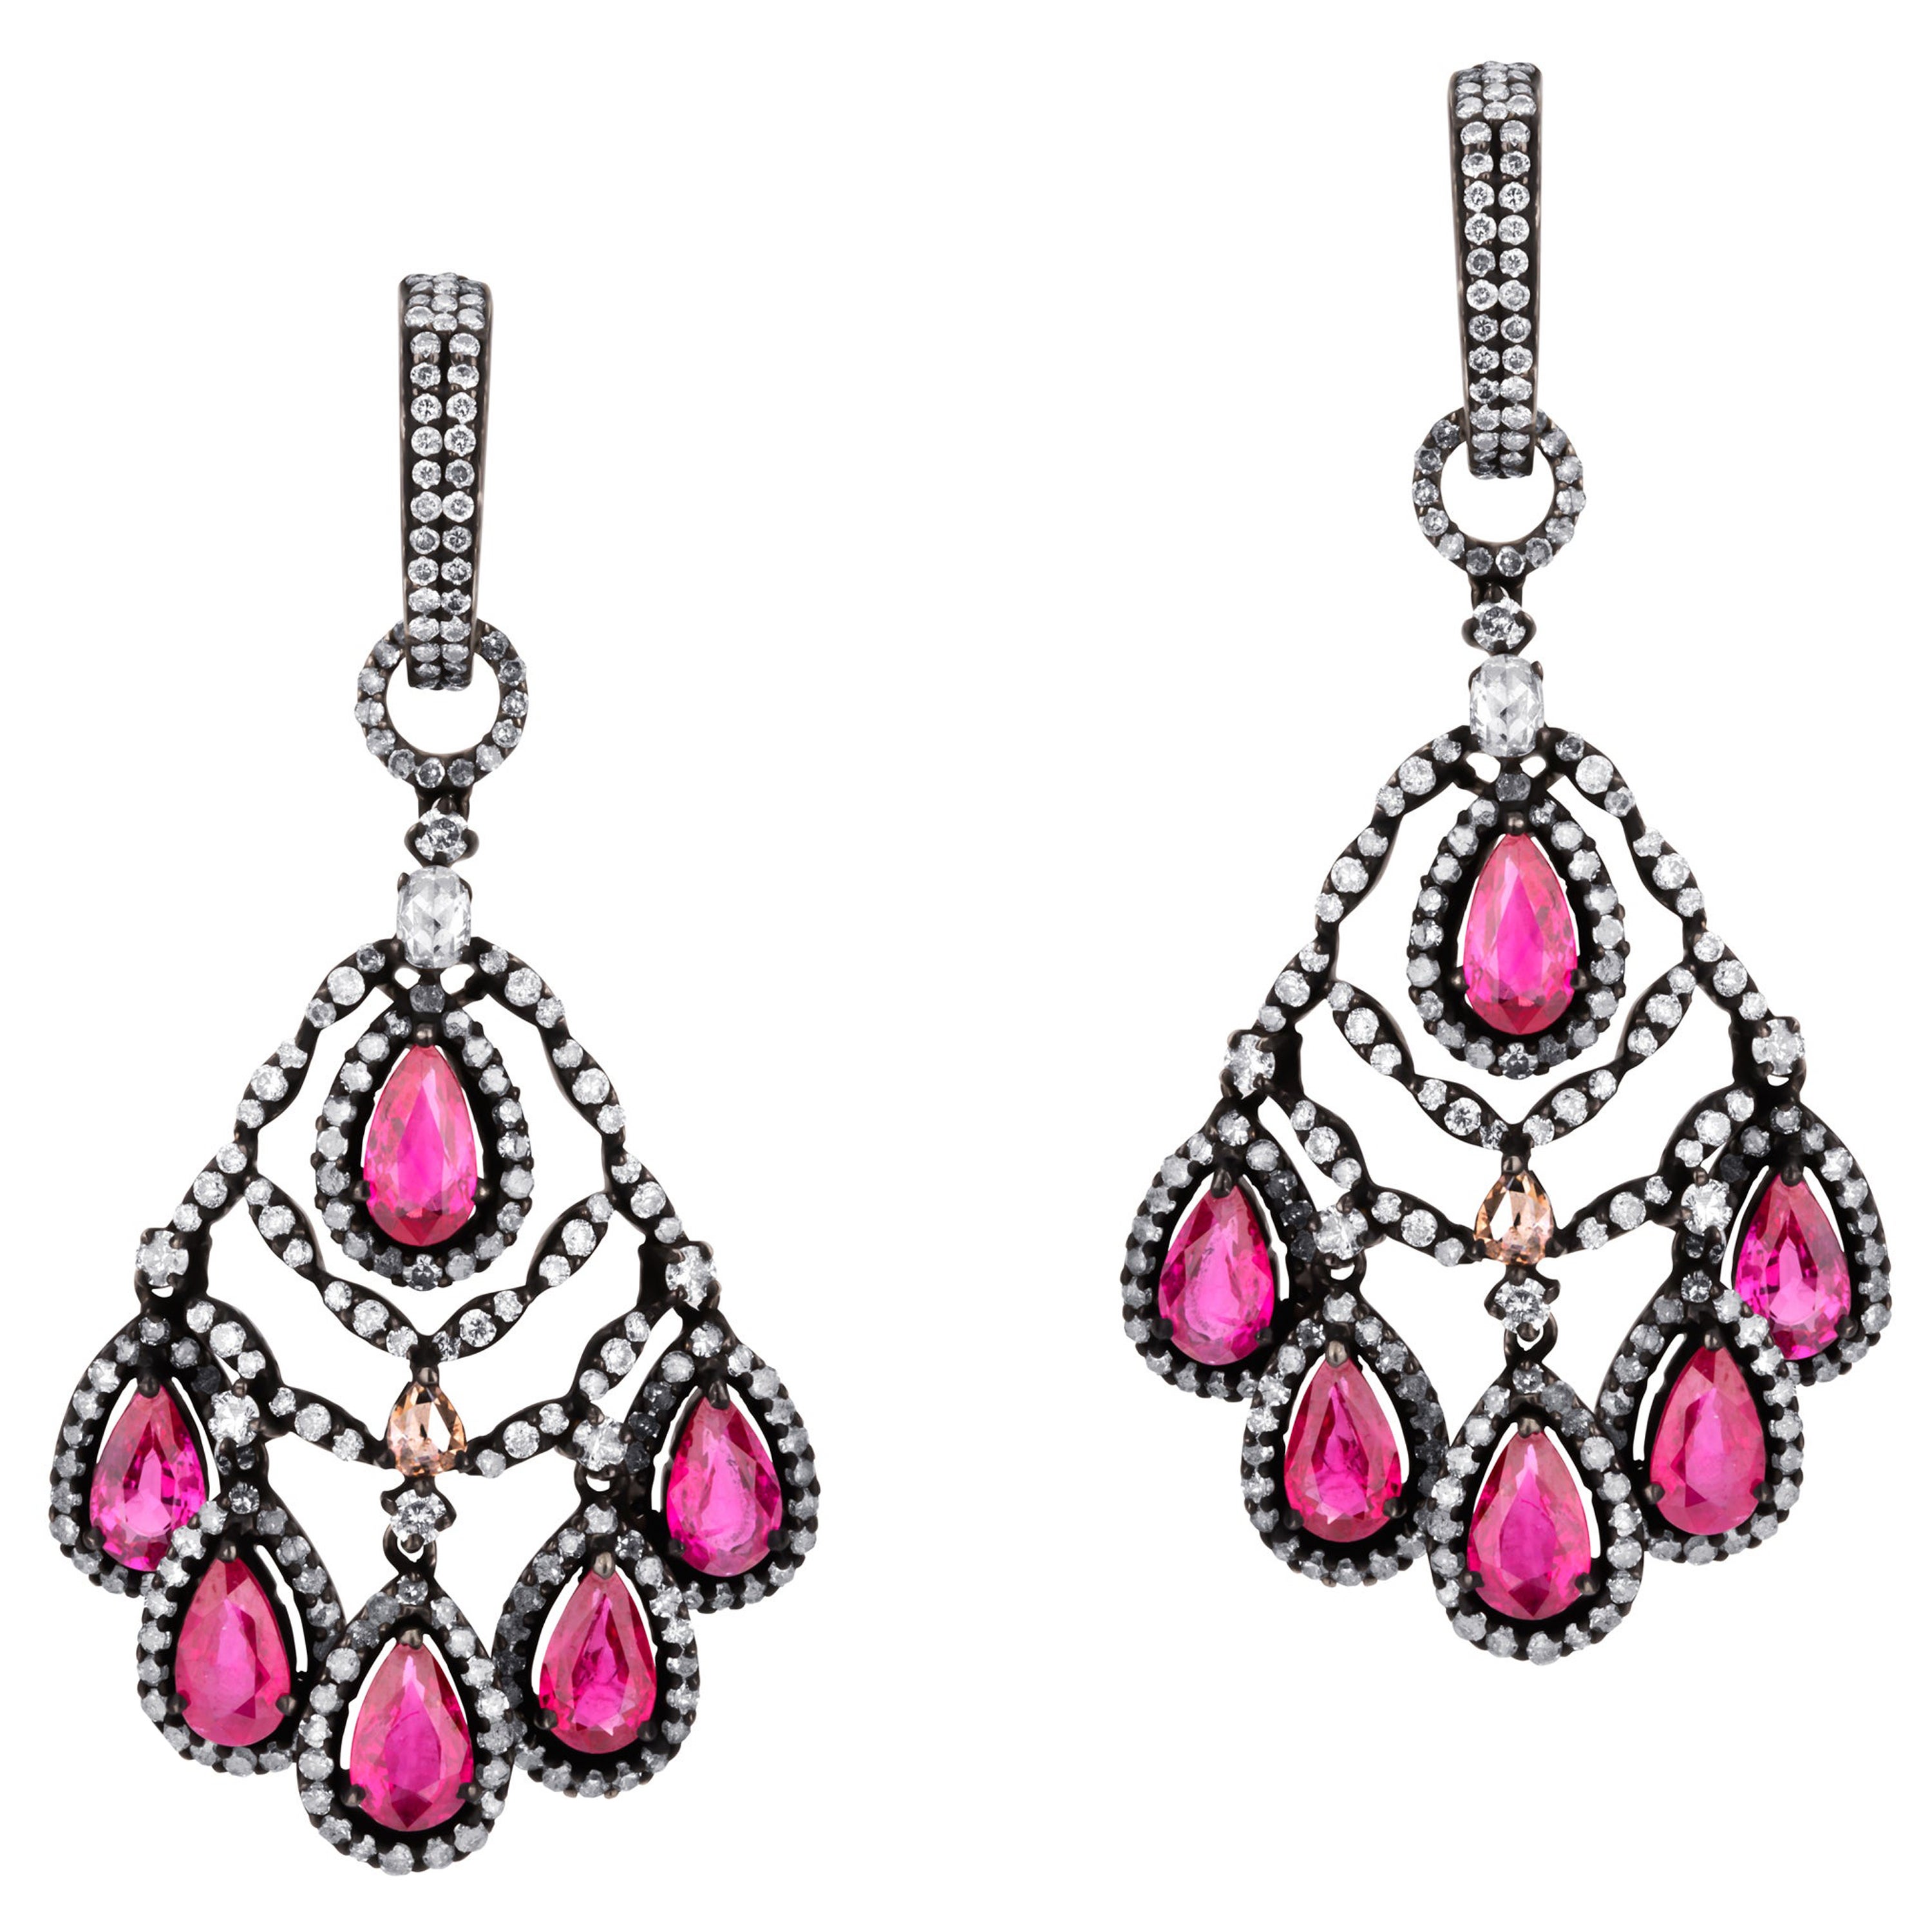 Details about   Sterling Silver Faceted RUBY Victorian-Style Dangle Earrings #812...Handmade USA 